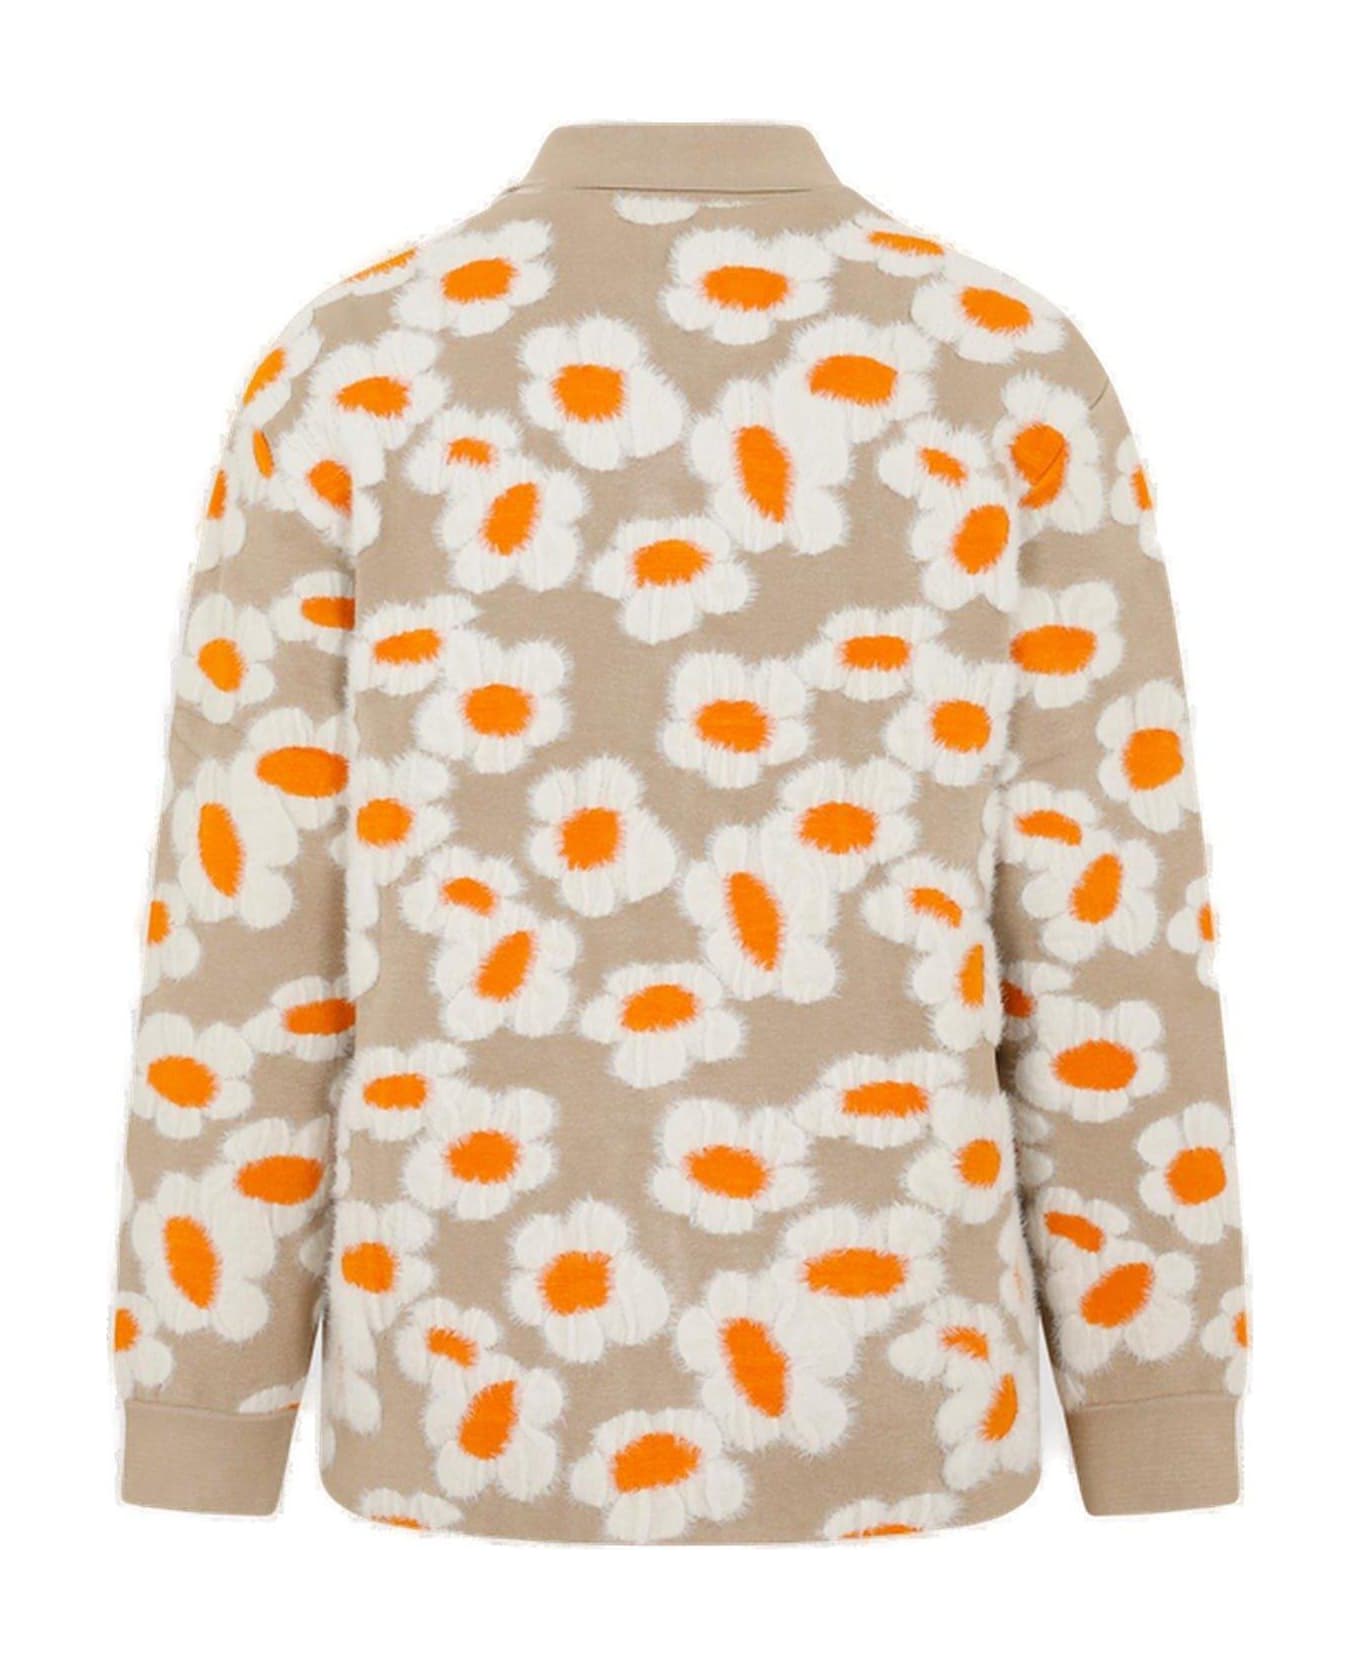 Jacquemus Floral Patterned Long-sleeved Shirt - MULTICOLOR